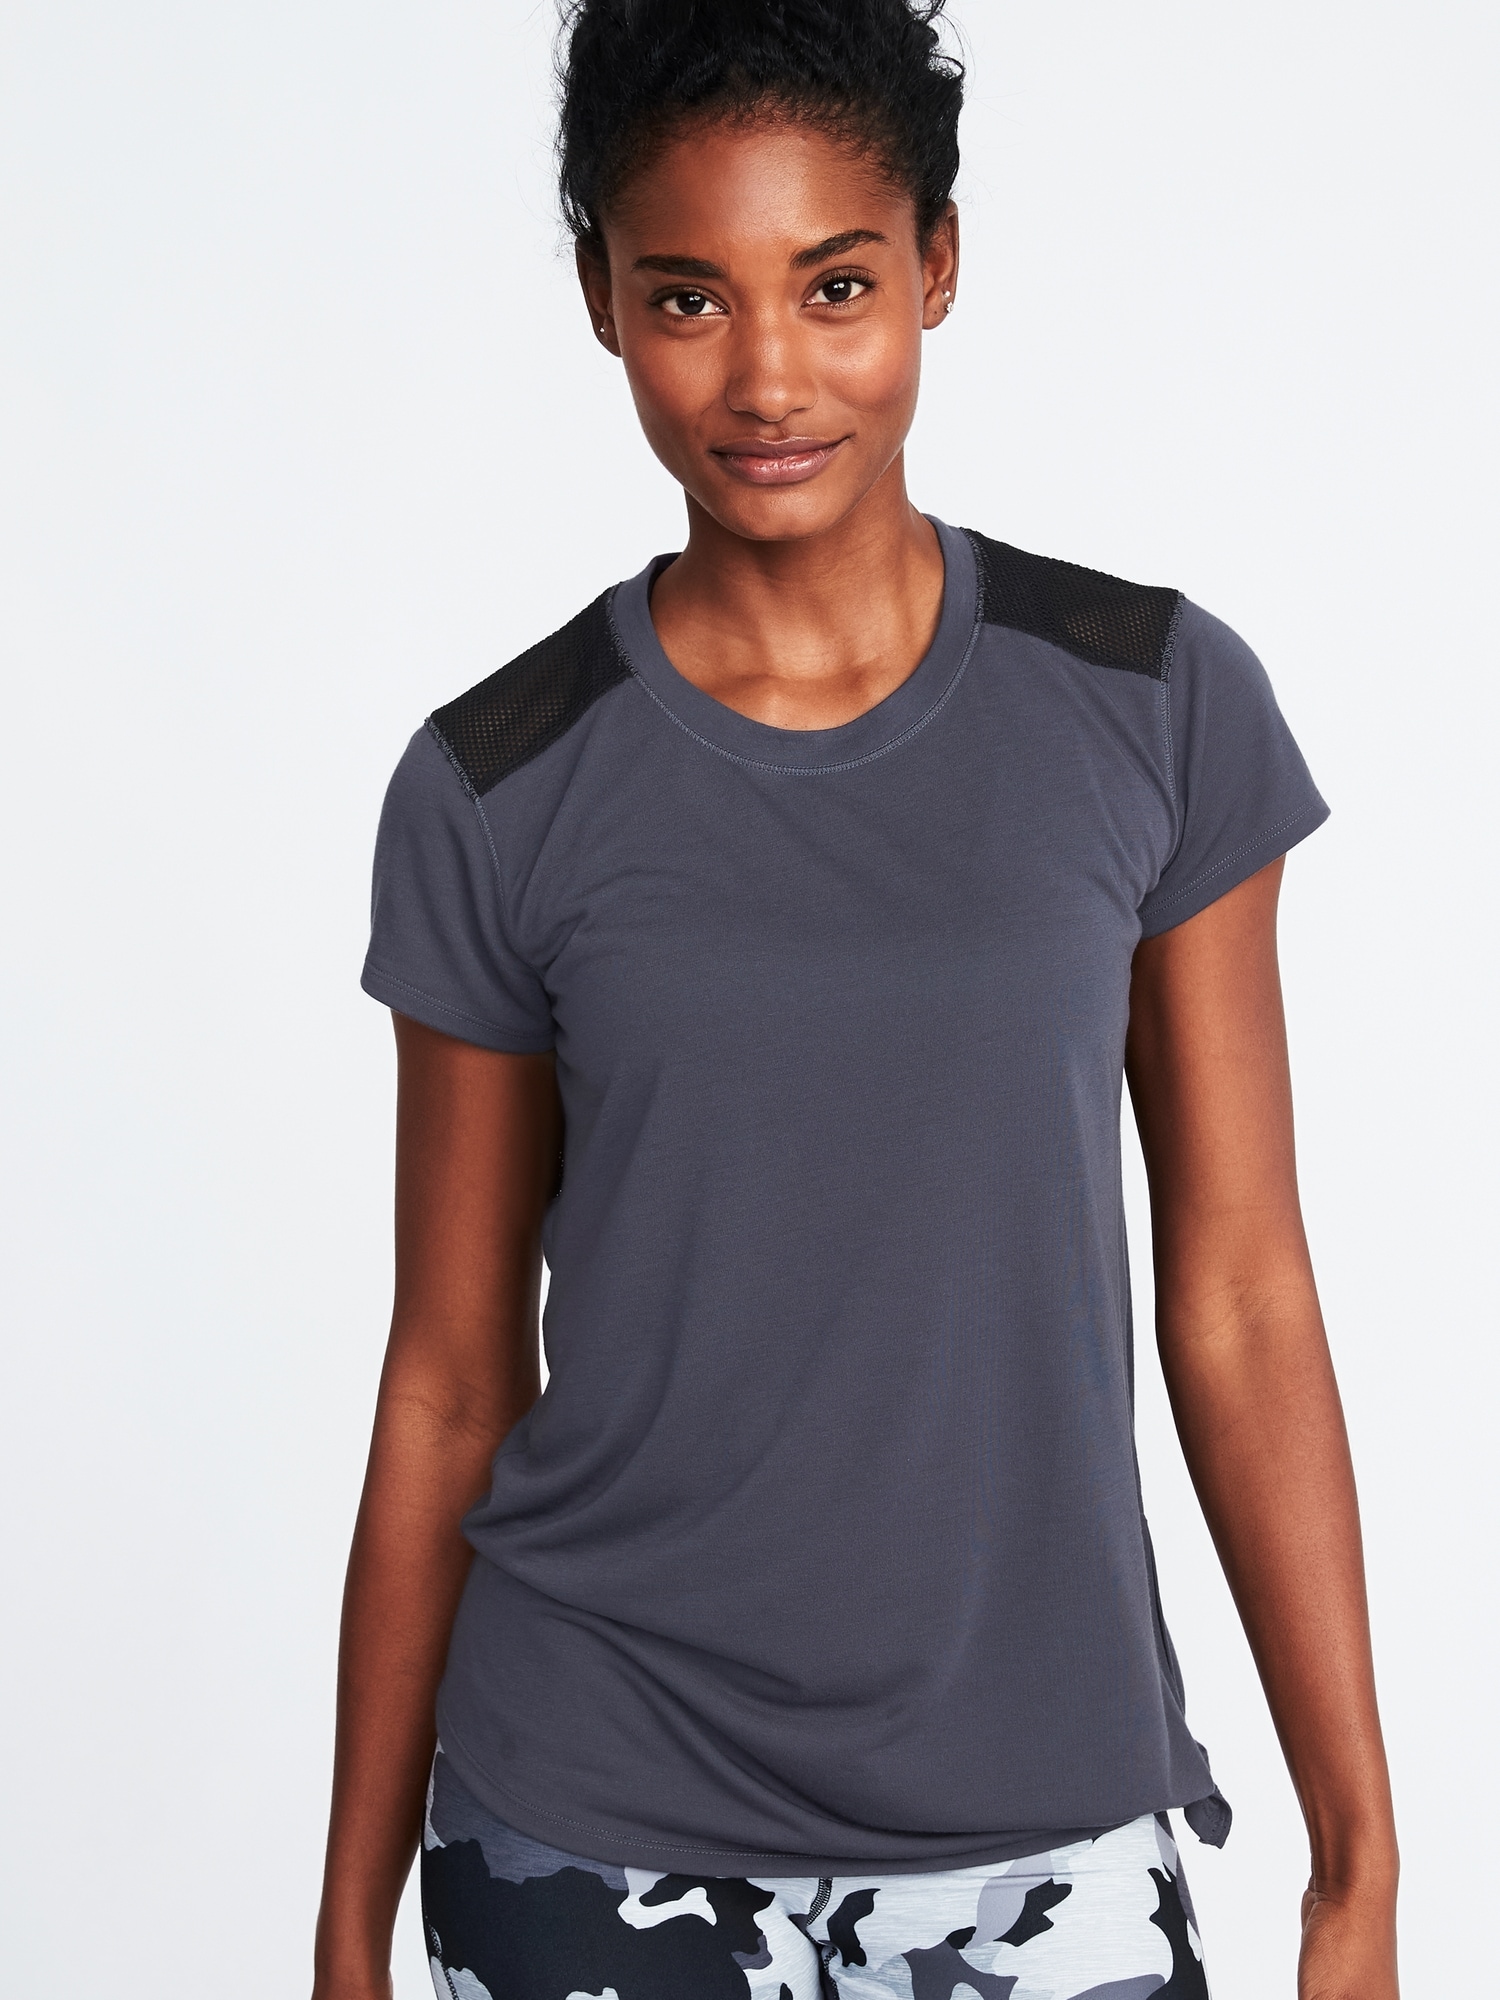 Mesh-Back Side-Tie Performance Top for Women | Old Navy